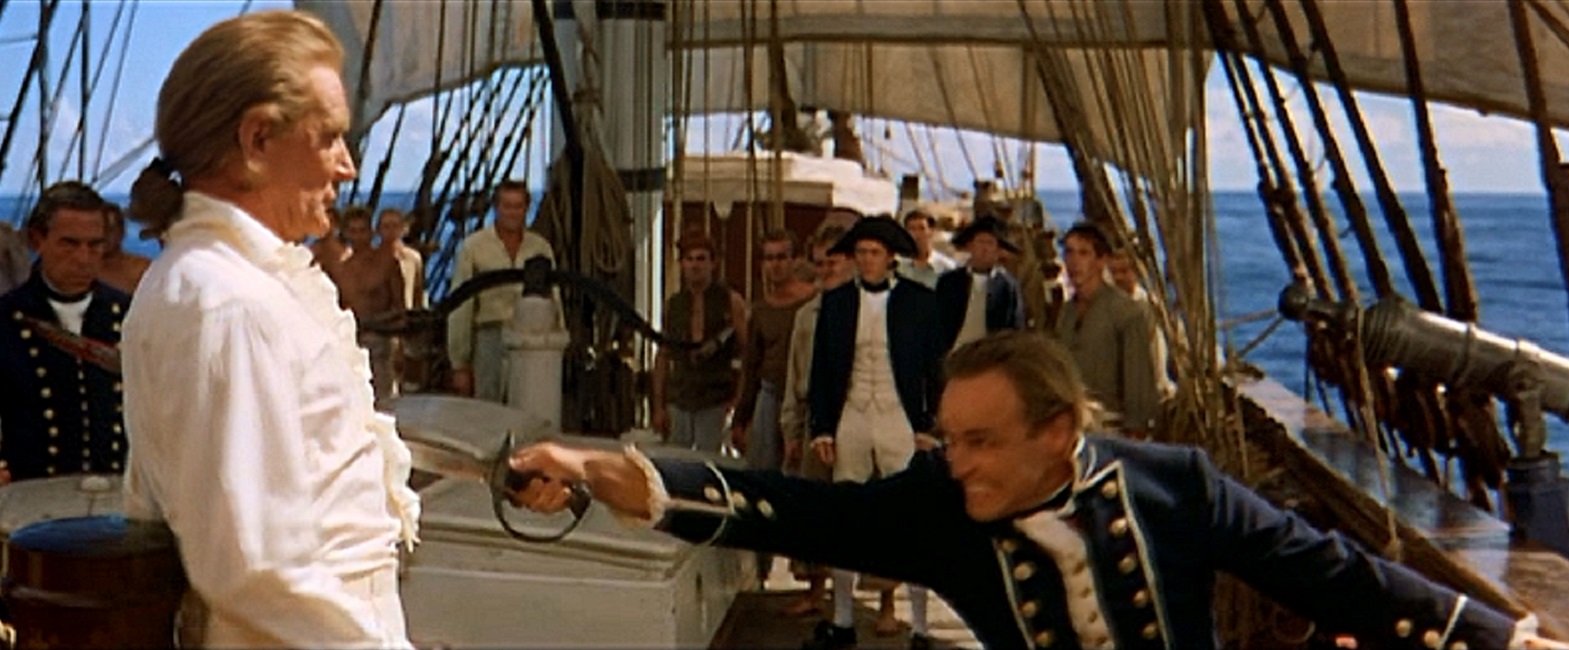 Image result for Mutiny on the Bounty - brando and howard